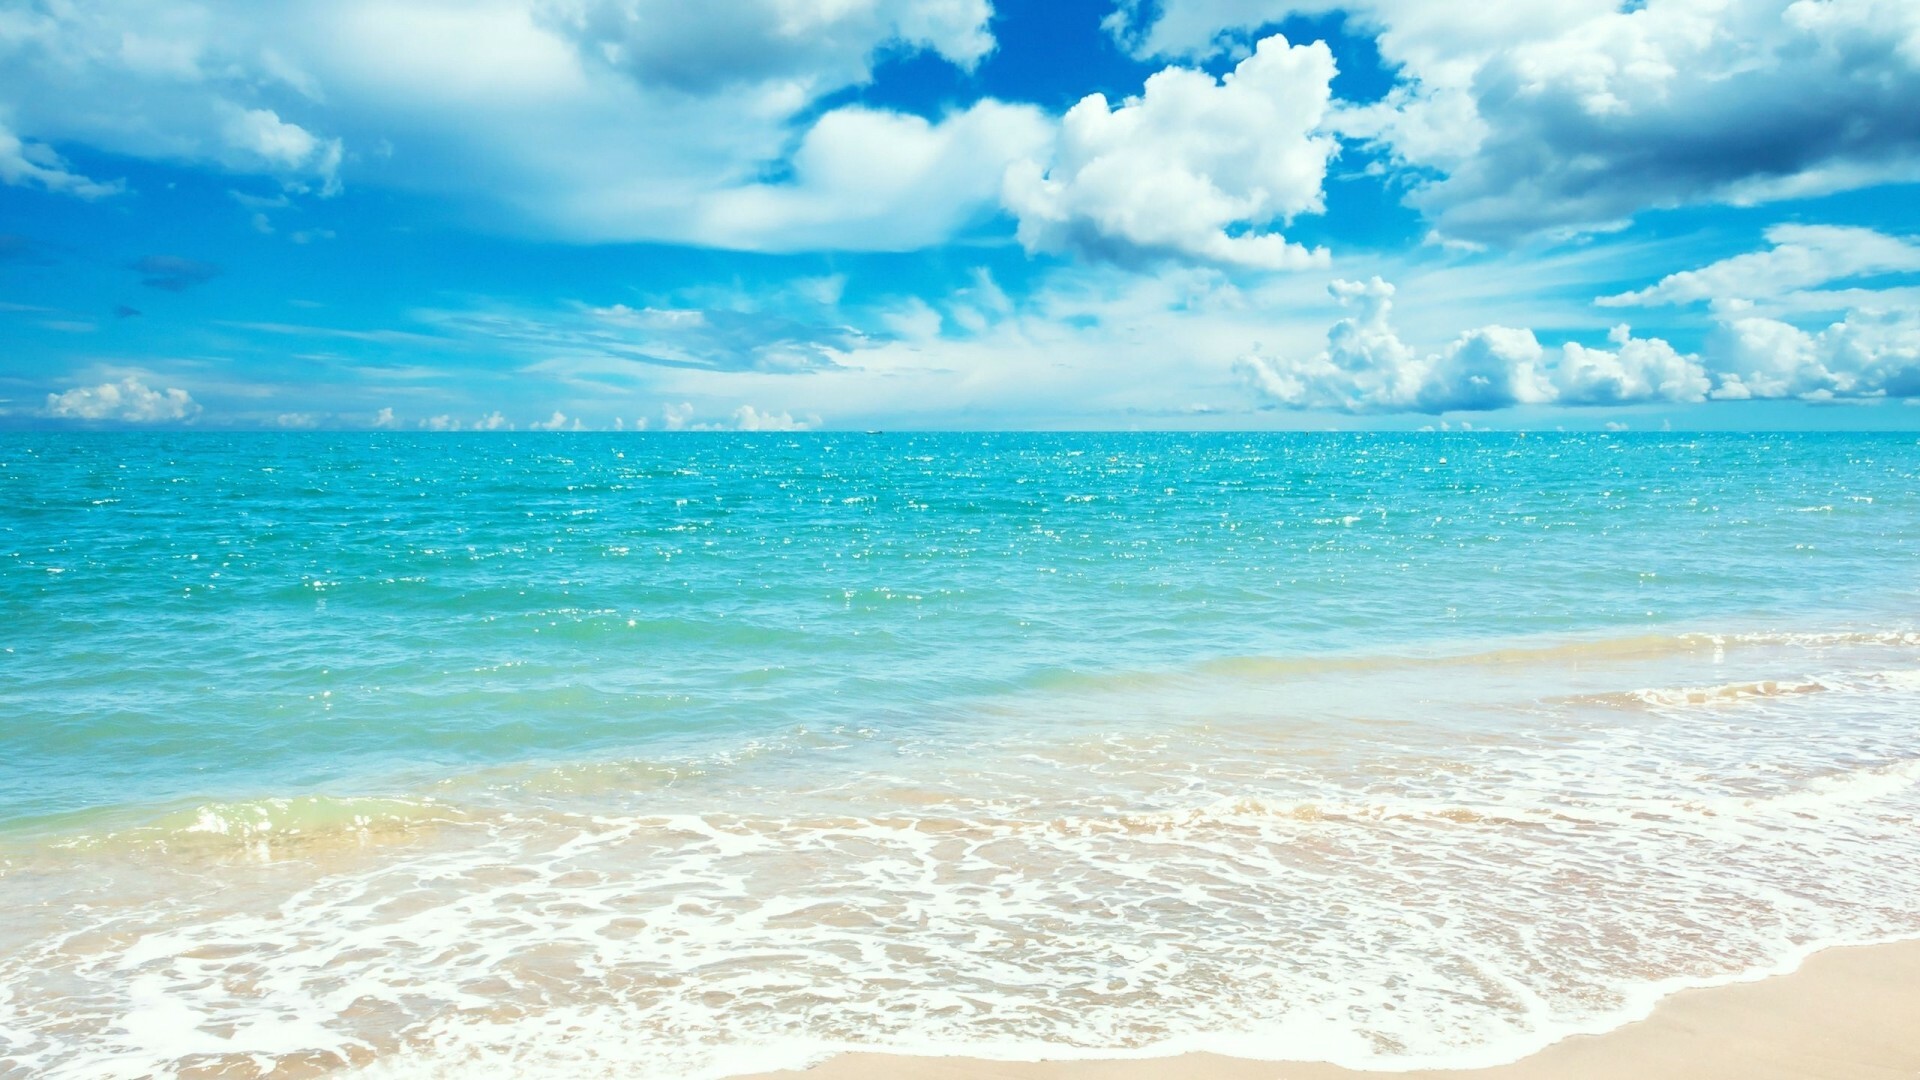 Summer: Most popular time of the year for holidays, Beach vacations spots. 1920x1080 Full HD Wallpaper.